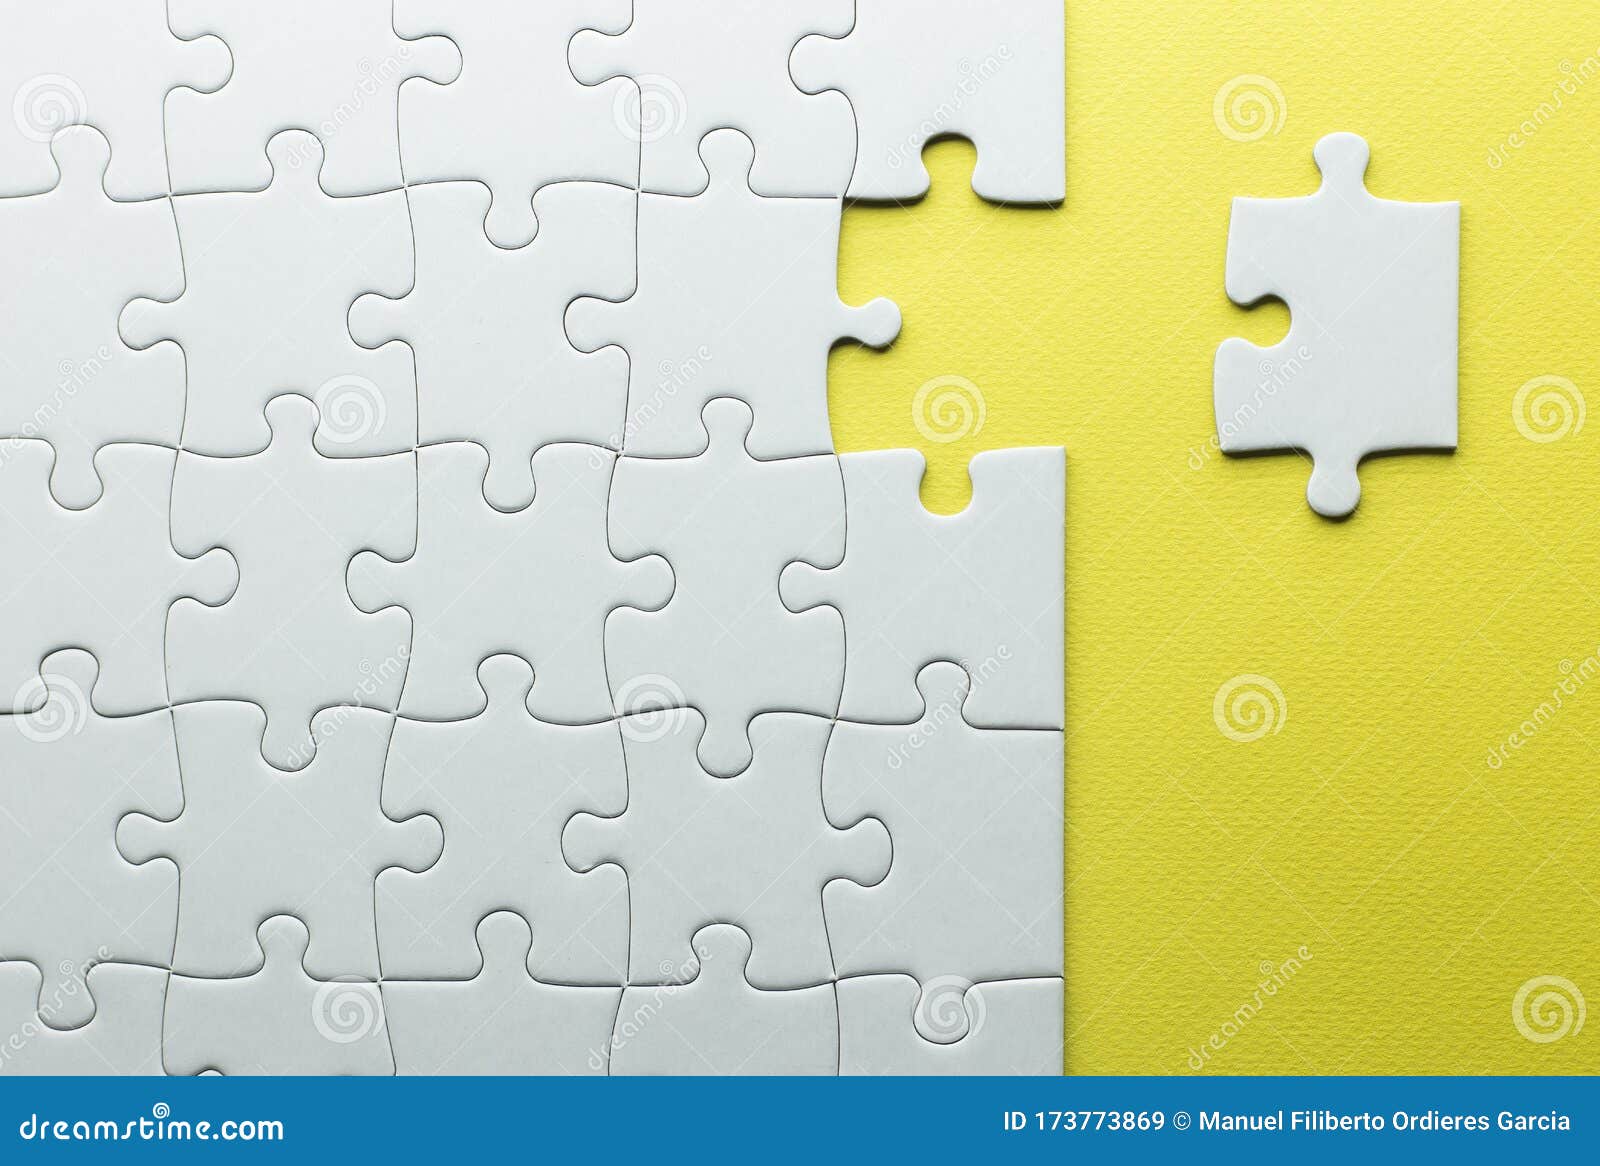 A Missing Piece To Complete a Puzzle, White Pieces on a Yellow Textured  Background Stock Image - Image of jigsaw, idea: 173773869